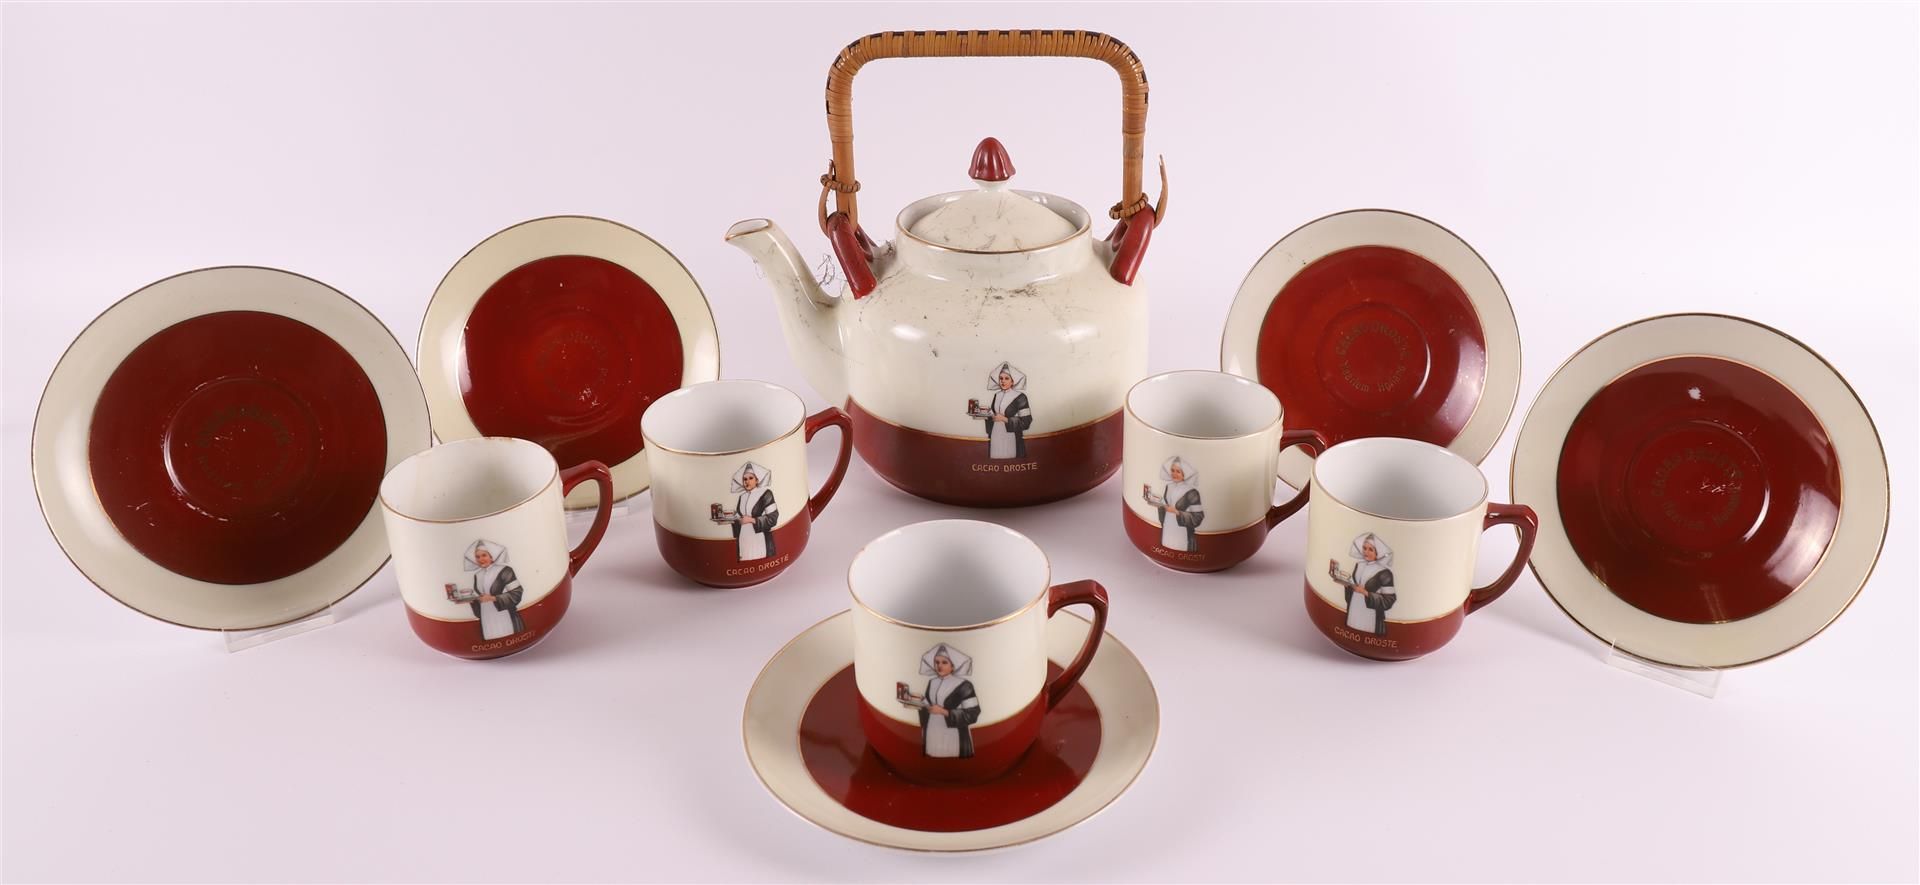 A porcelain Droste cacao chocolate kettle with five cups and saucers, ca. 1930. Commissioned by